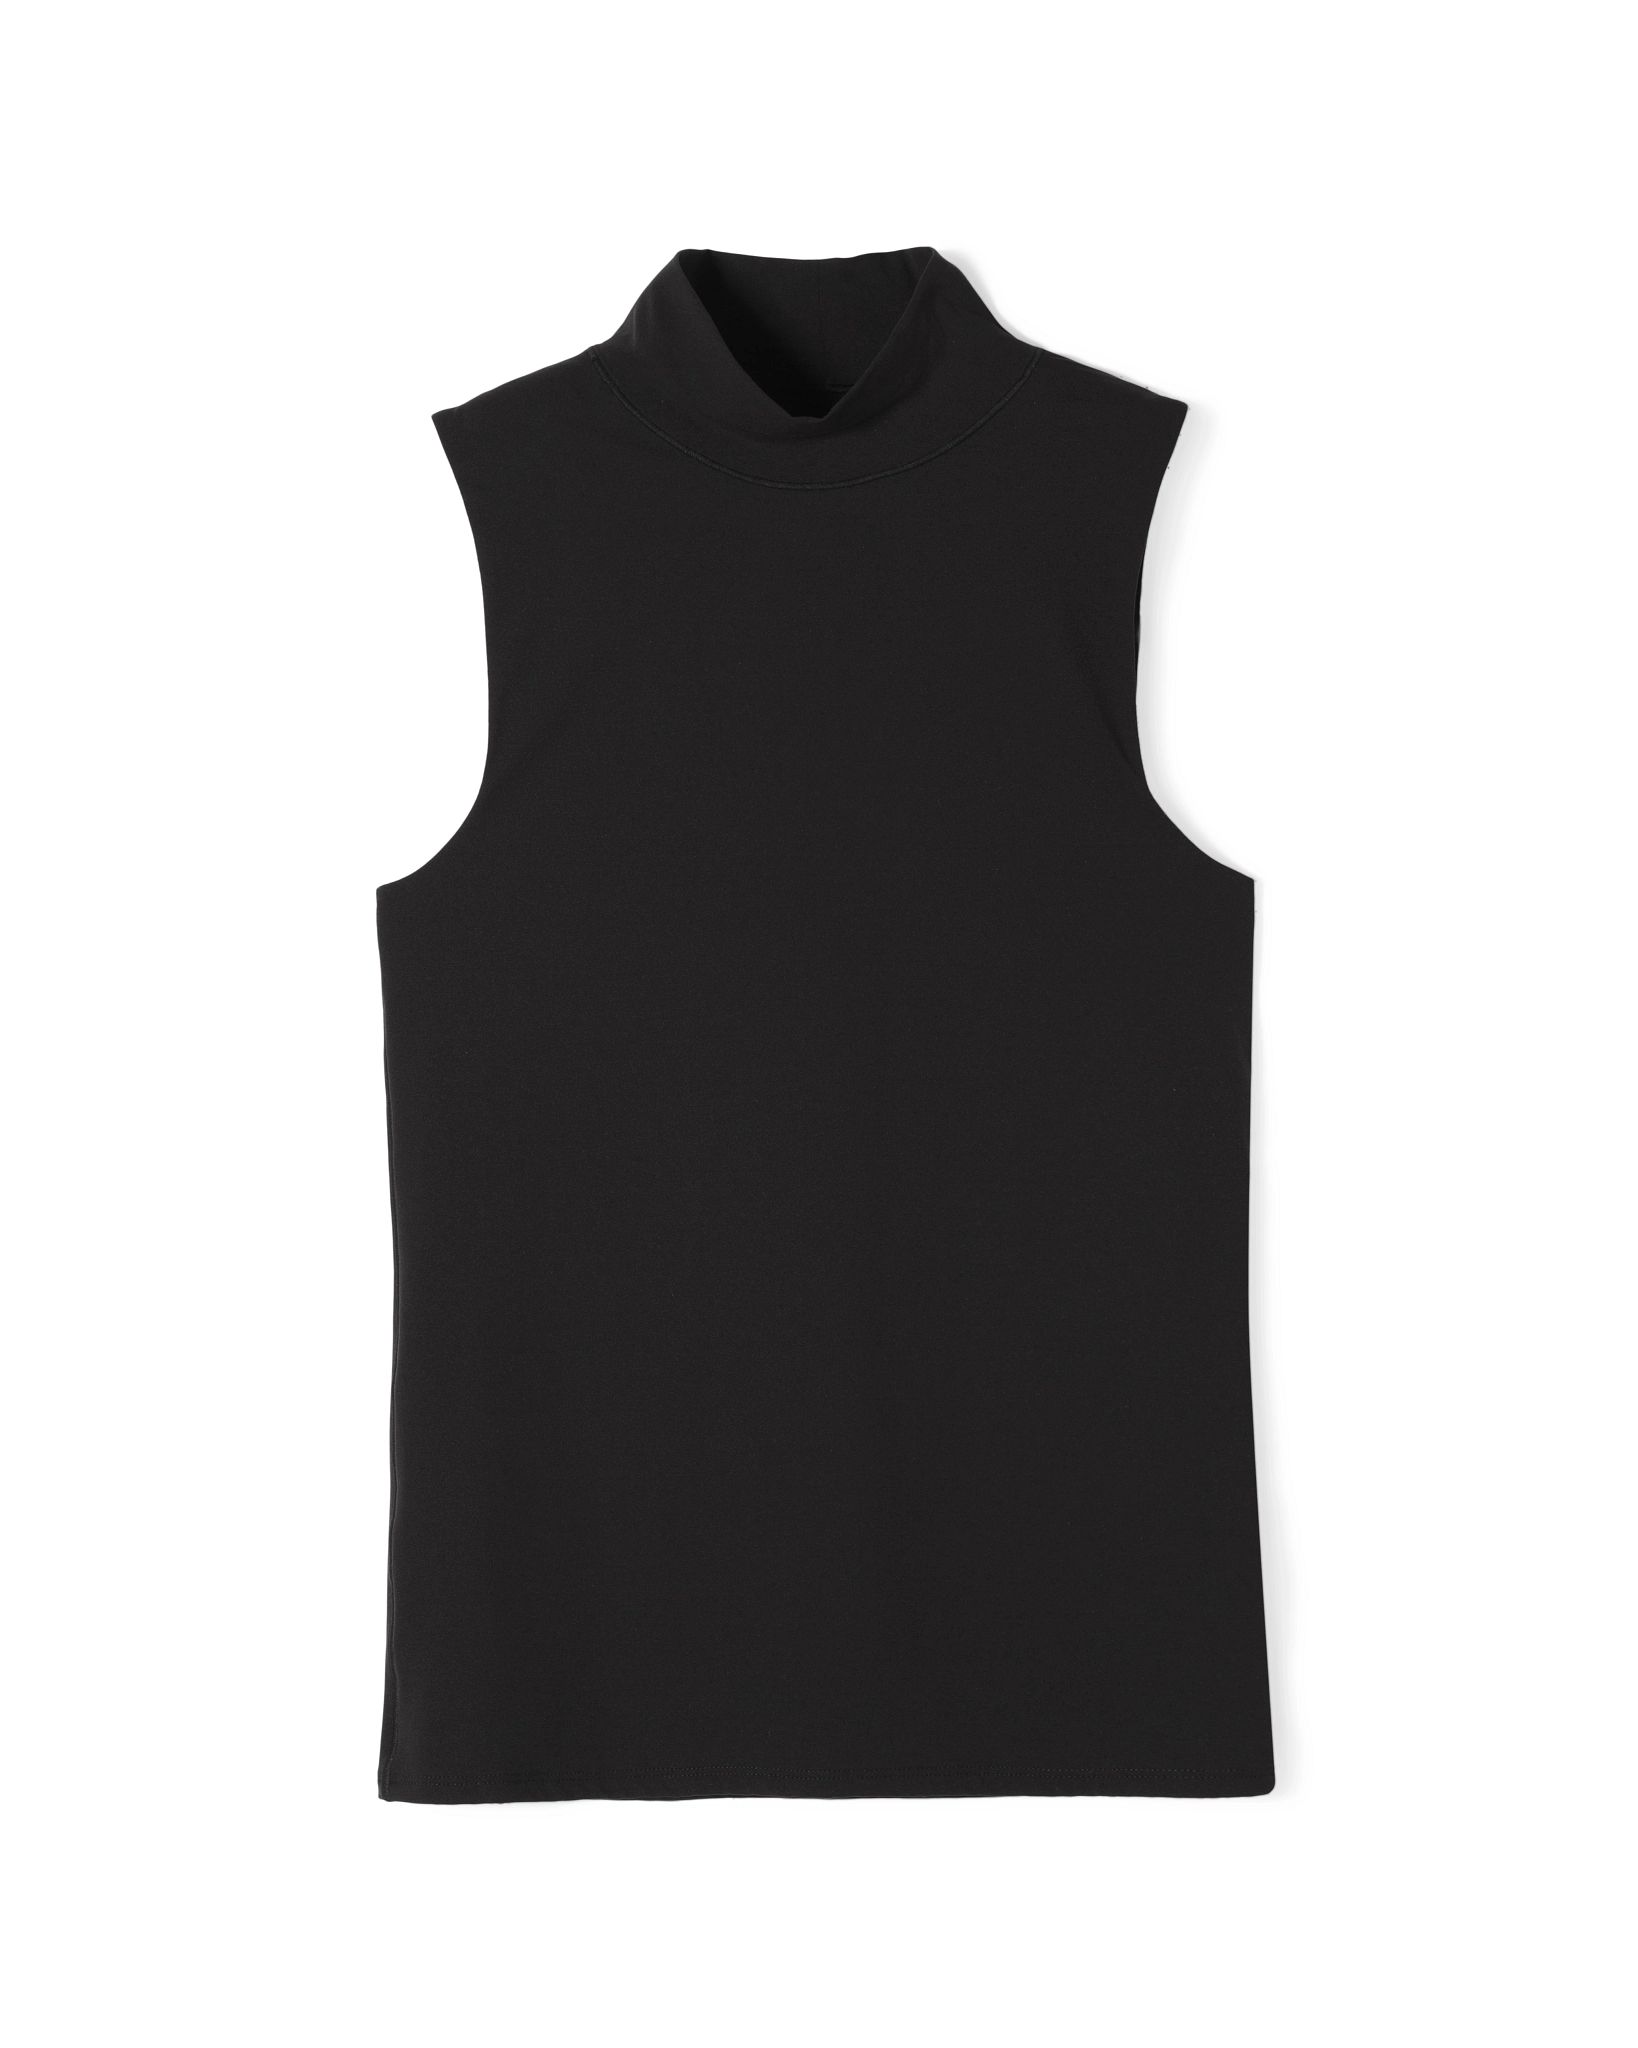 WHBM® FORME Mock Neck Tank click to view larger image.